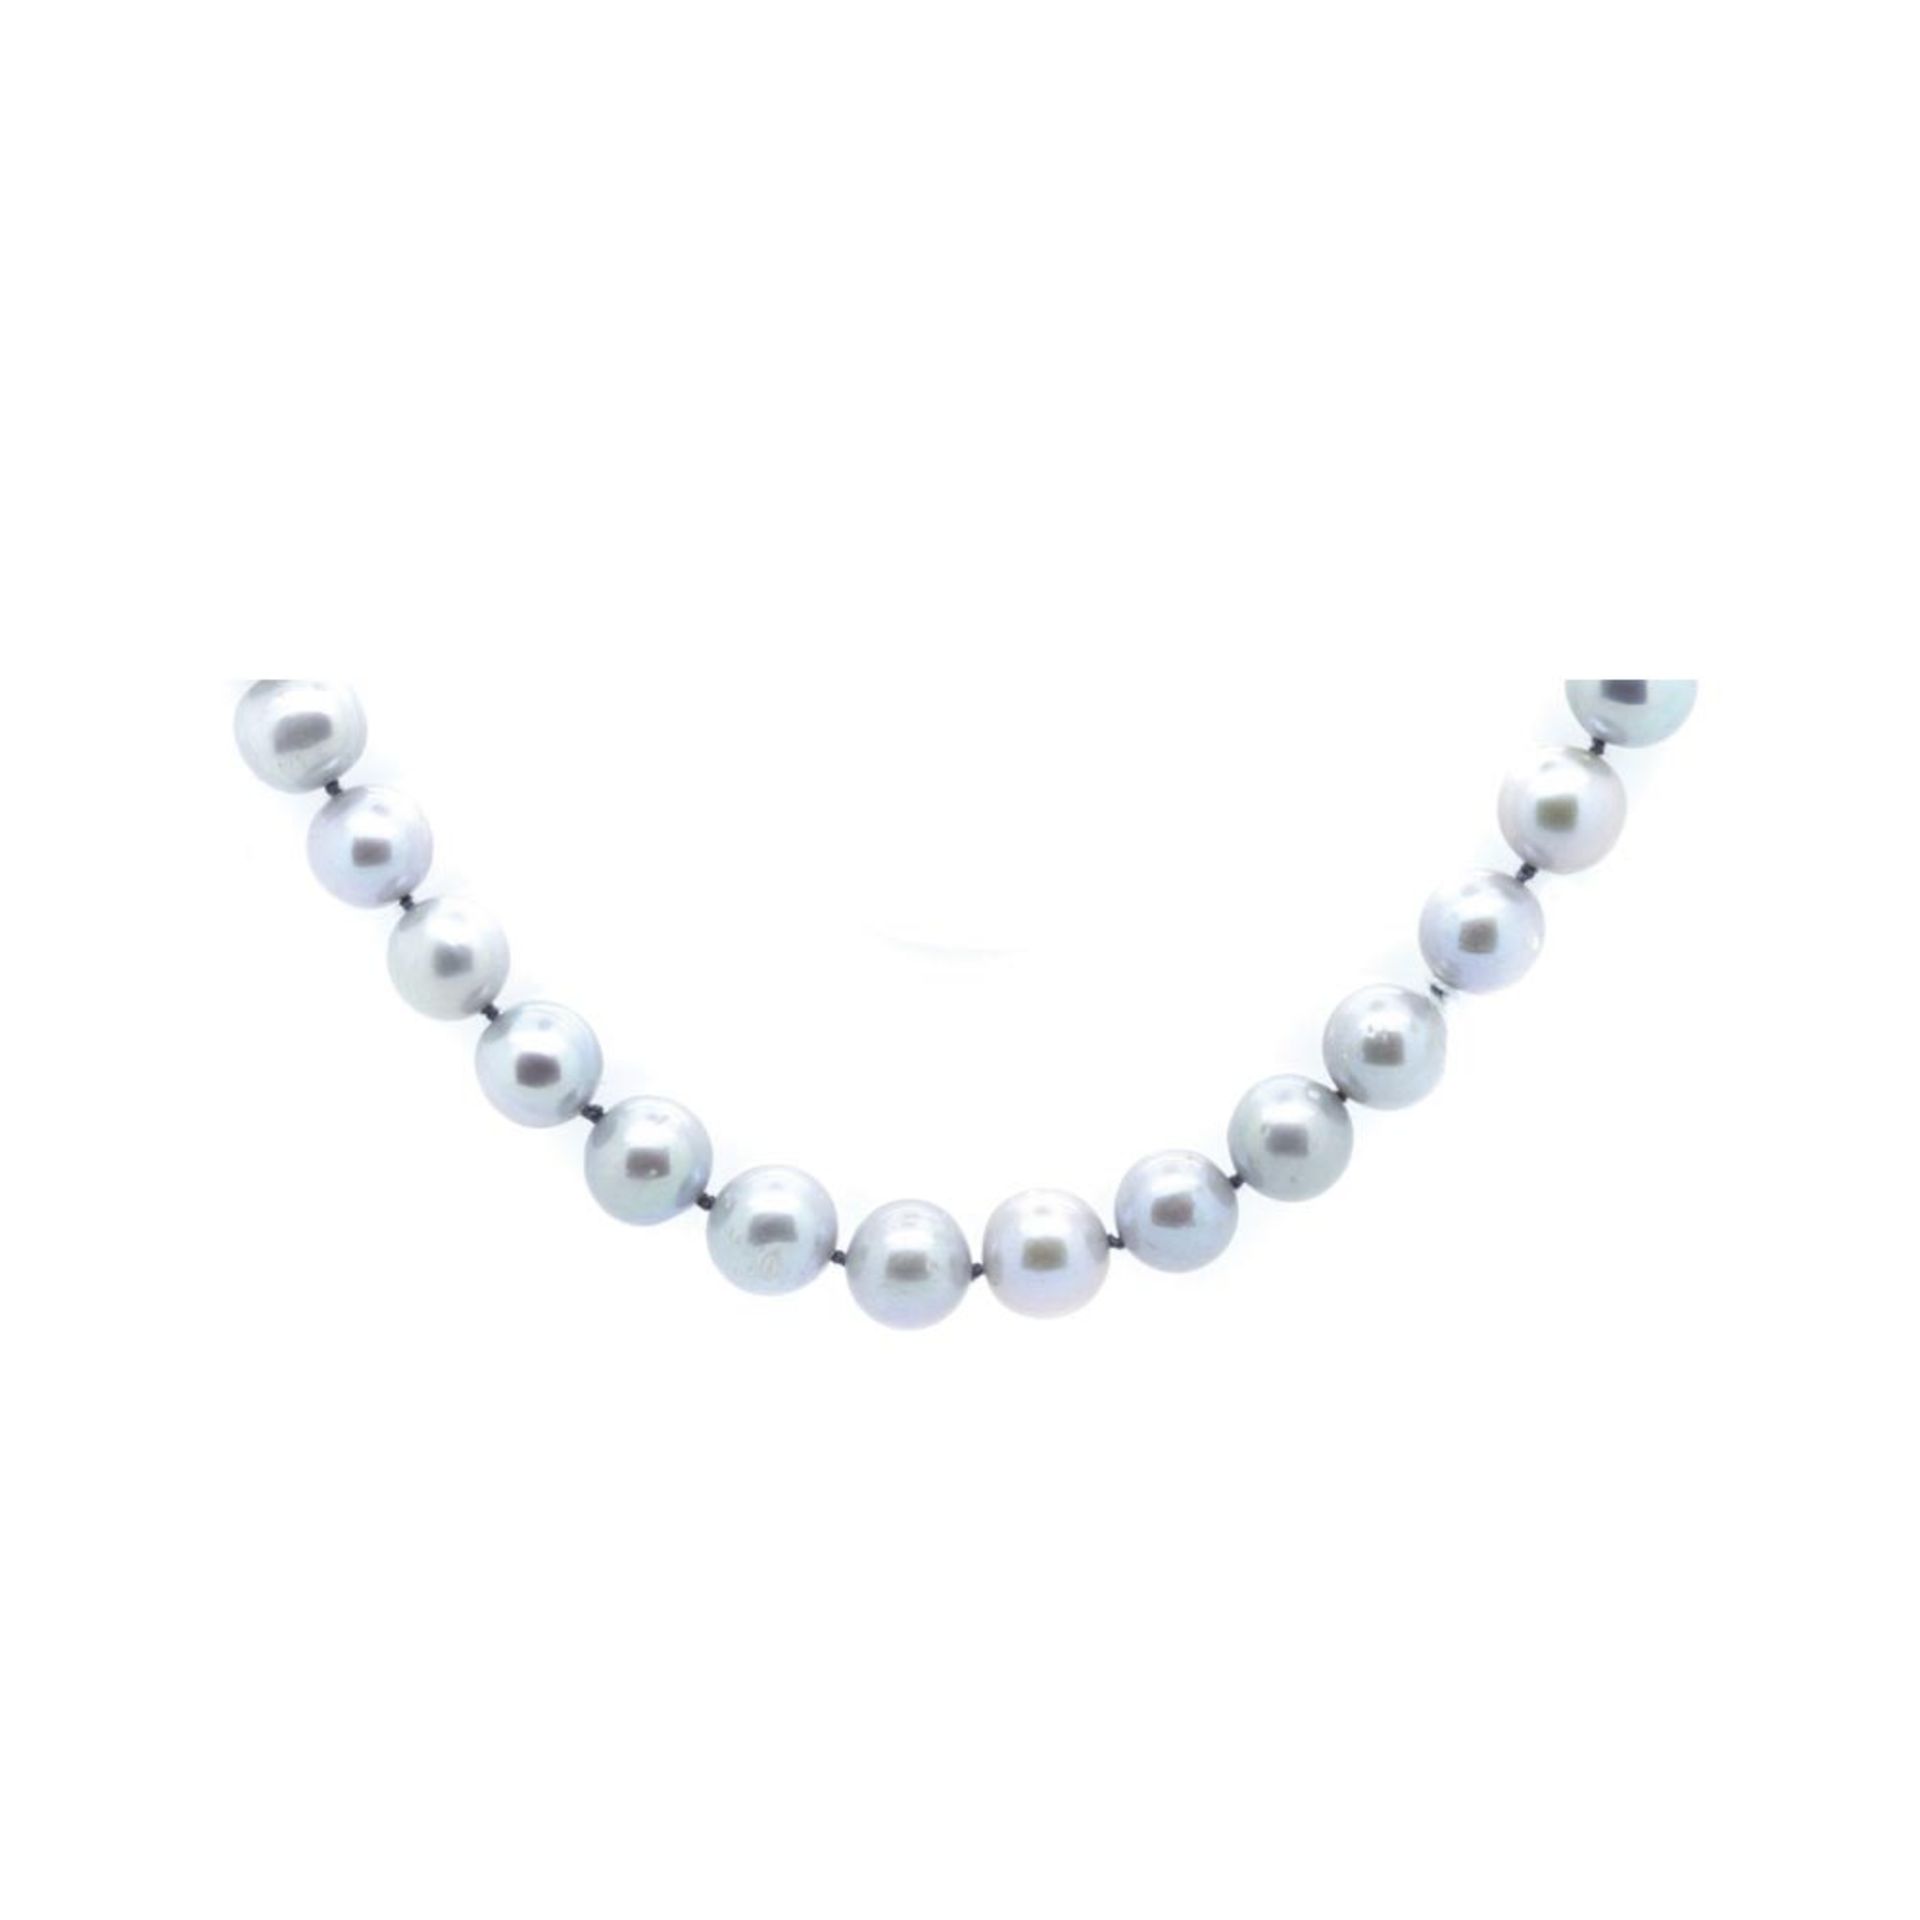 Silver and cultured pearls necklace